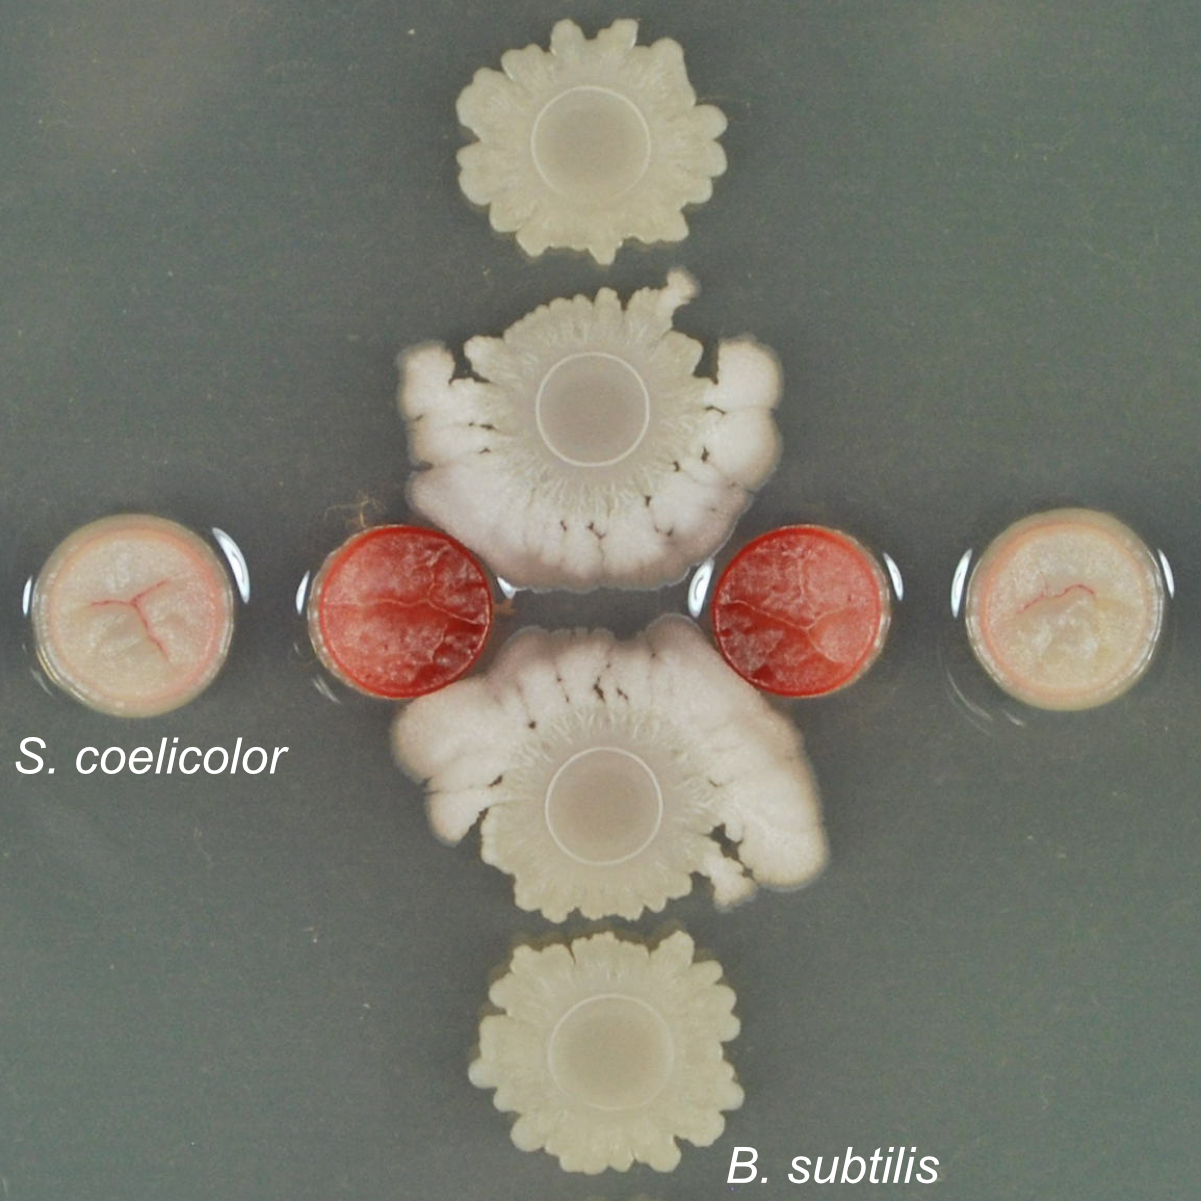 This is a photograph of an co-culture of Streptomyces coelicolor (horizontal) with Bacillus subtilis (vertical). The S. coelicolor colonies near B. subtilis have produced the red-pigmented metabolite undecylprodigiosin, whereas the Streptomyces further away have not. Similarly, the B. subtilis colonies near the S. coelicolor are spreading outwards, whereas the Bacillus colonies further away are stationary.